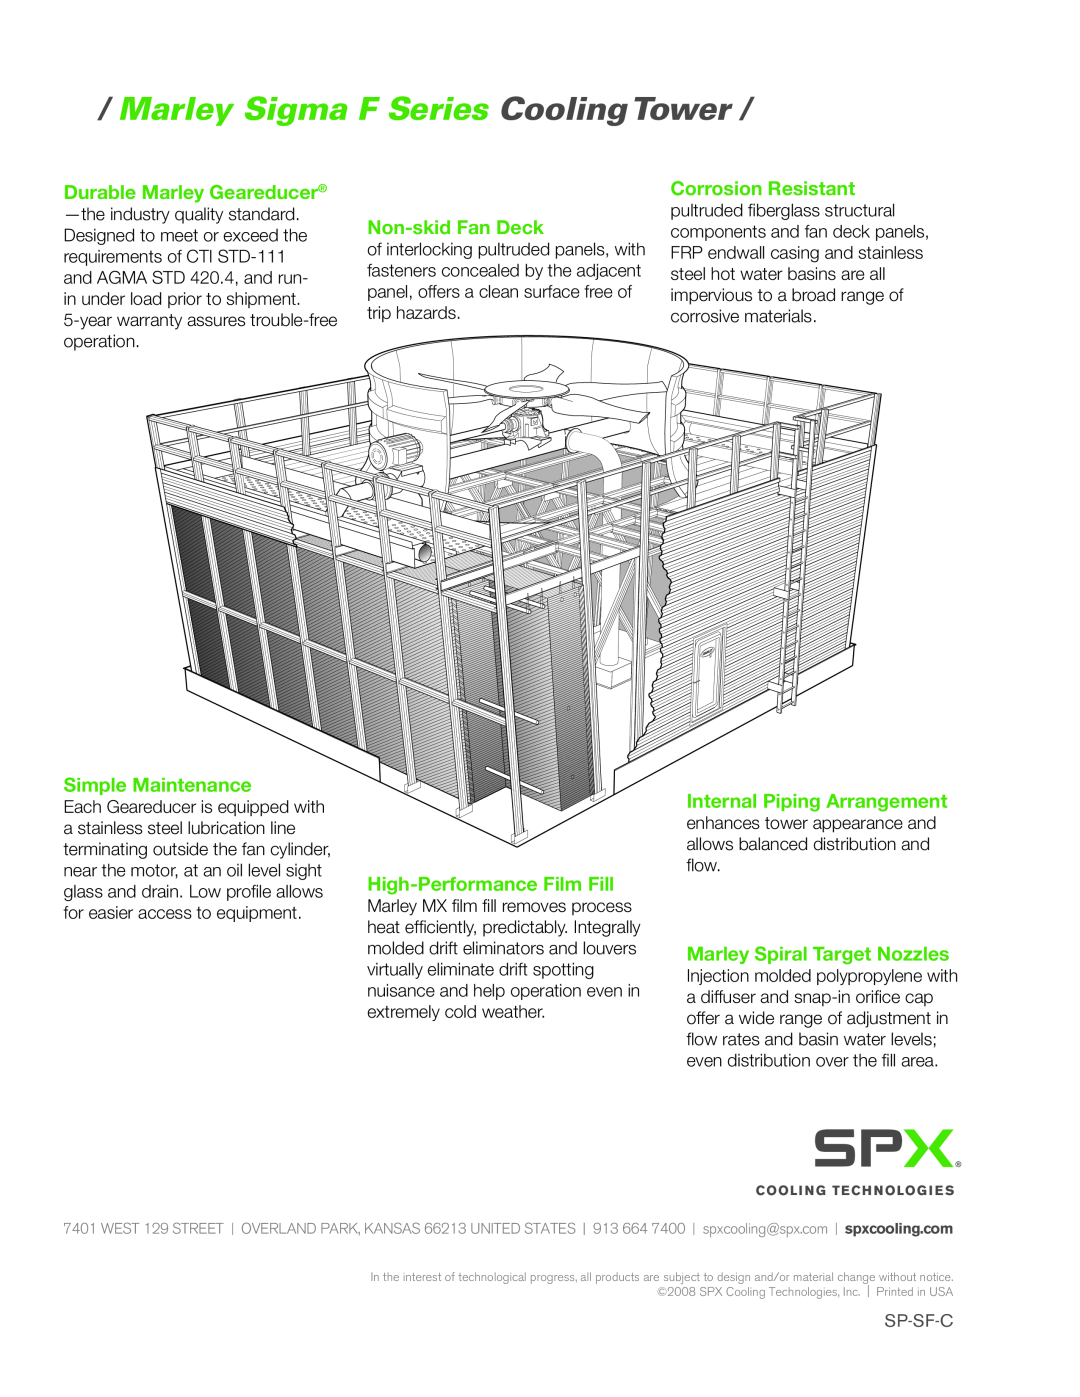 SPX Cooling Technologies manual Marley Sigma F Series CoolingTower, Durable Marley Geareducer, Non-skidFan Deck, Sp-Sf-C 